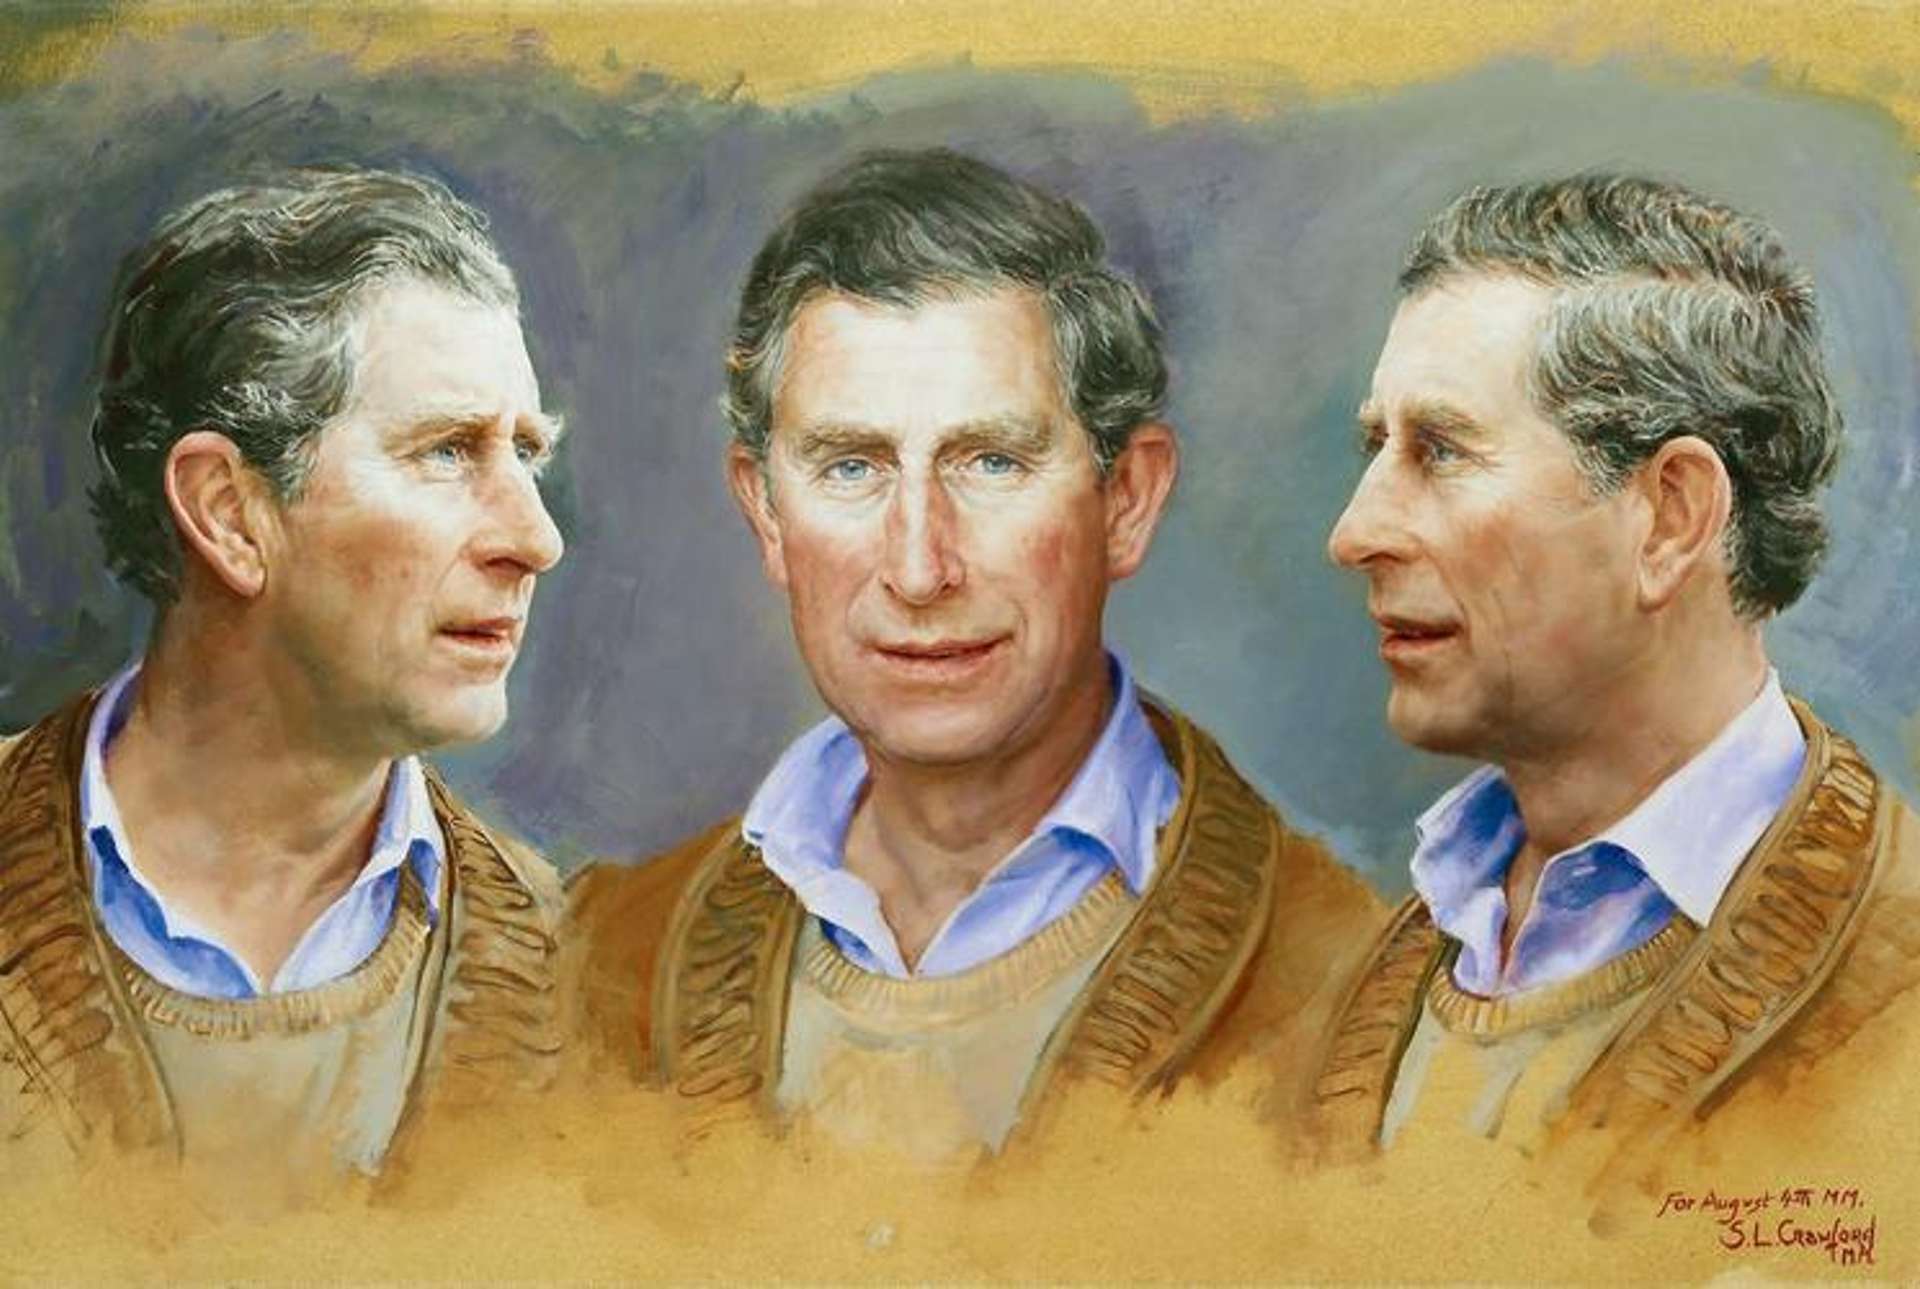 A portrait of King Charles III by artist Susan Crawford. It is based on King Charles I's portrait by Anthony van Dyck, and shows the monarch from three different angles. He is wearing a cardigan and a button-up blue shirt.